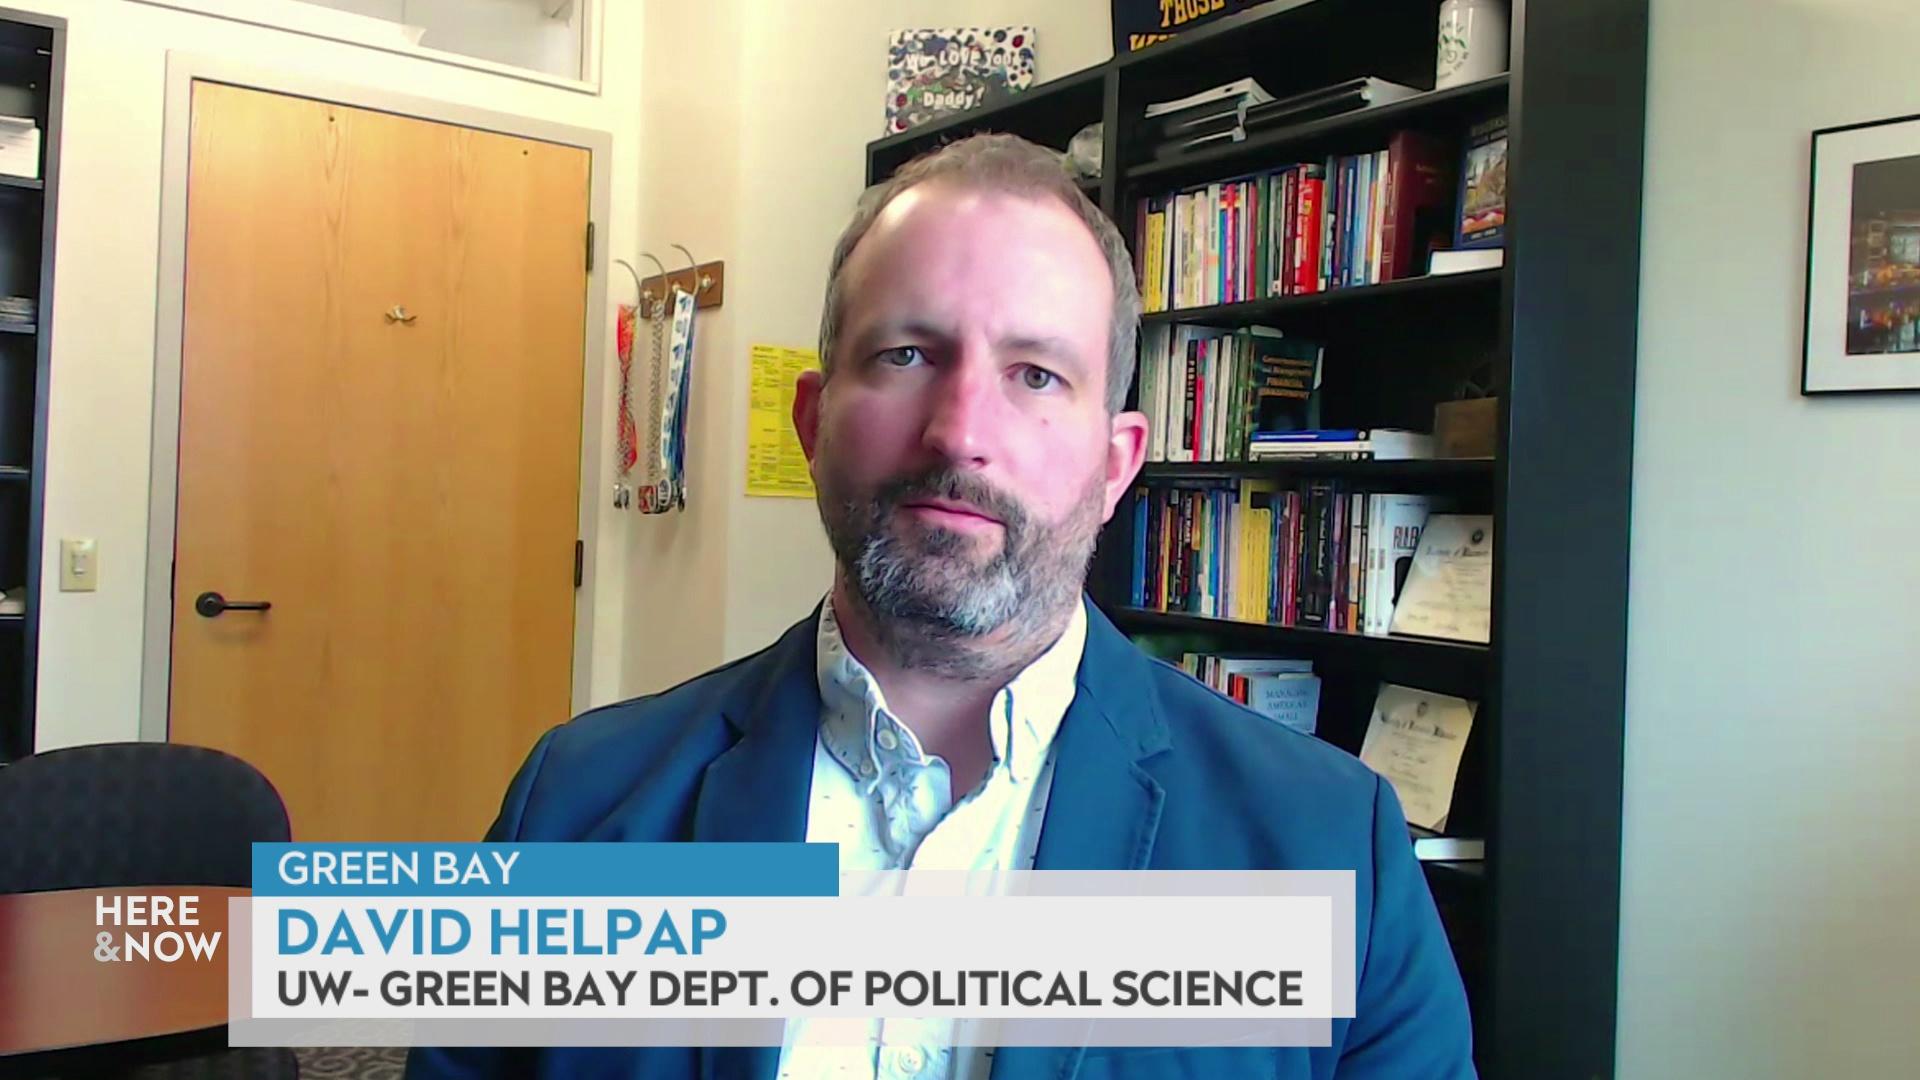 A still image from a video shows David Helpap seated in front of a bookshelf and wooden door with a graphic at bottom reading 'Green Bay,' 'David Helpap' and 'UW-Green Bay Dept. of Political Science.'